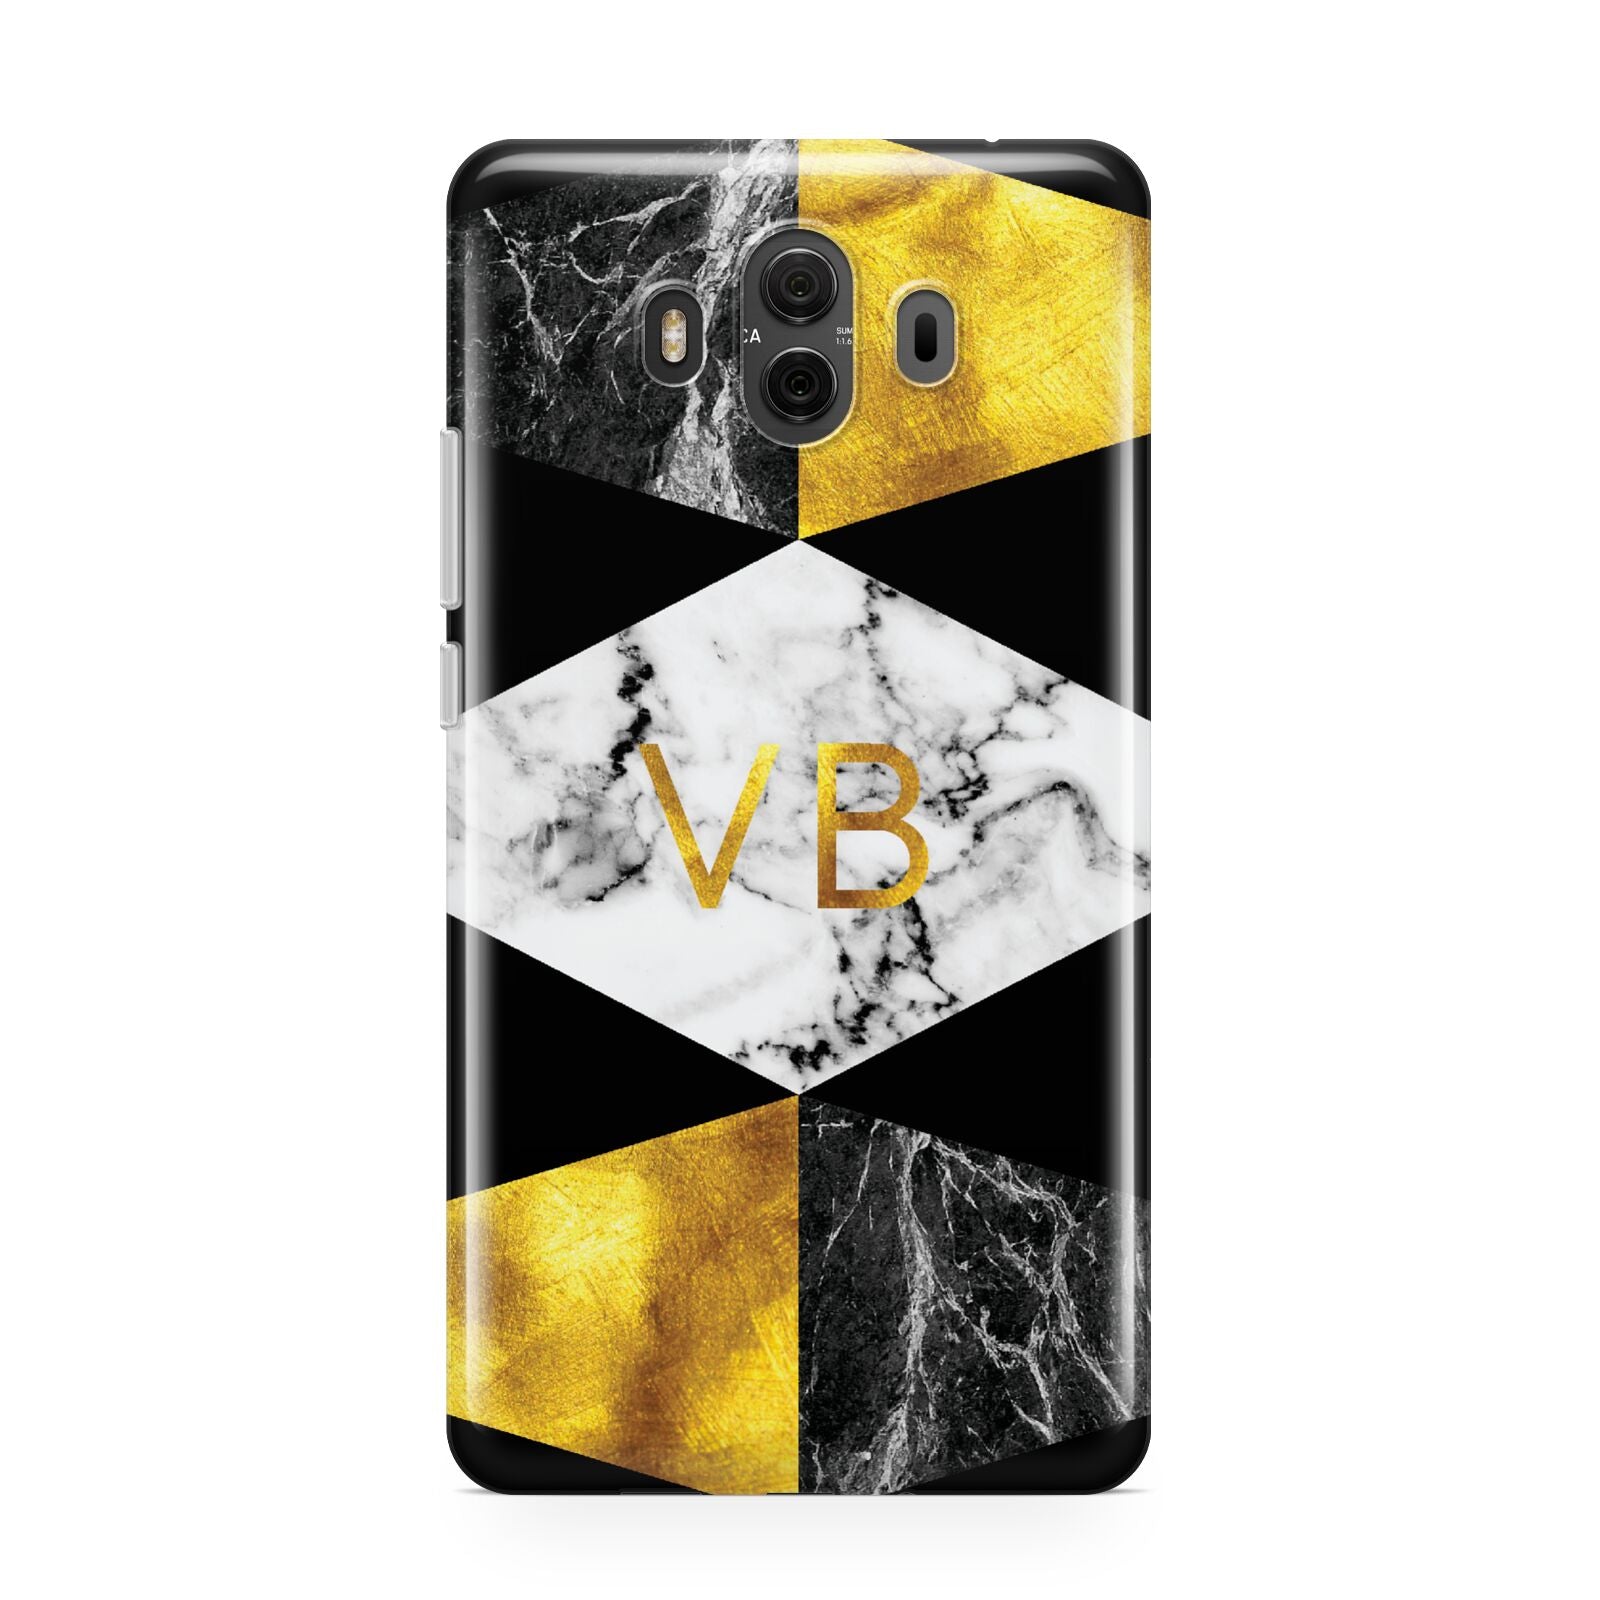 Personalised Gold Marble Initials Huawei Mate 10 Protective Phone Case